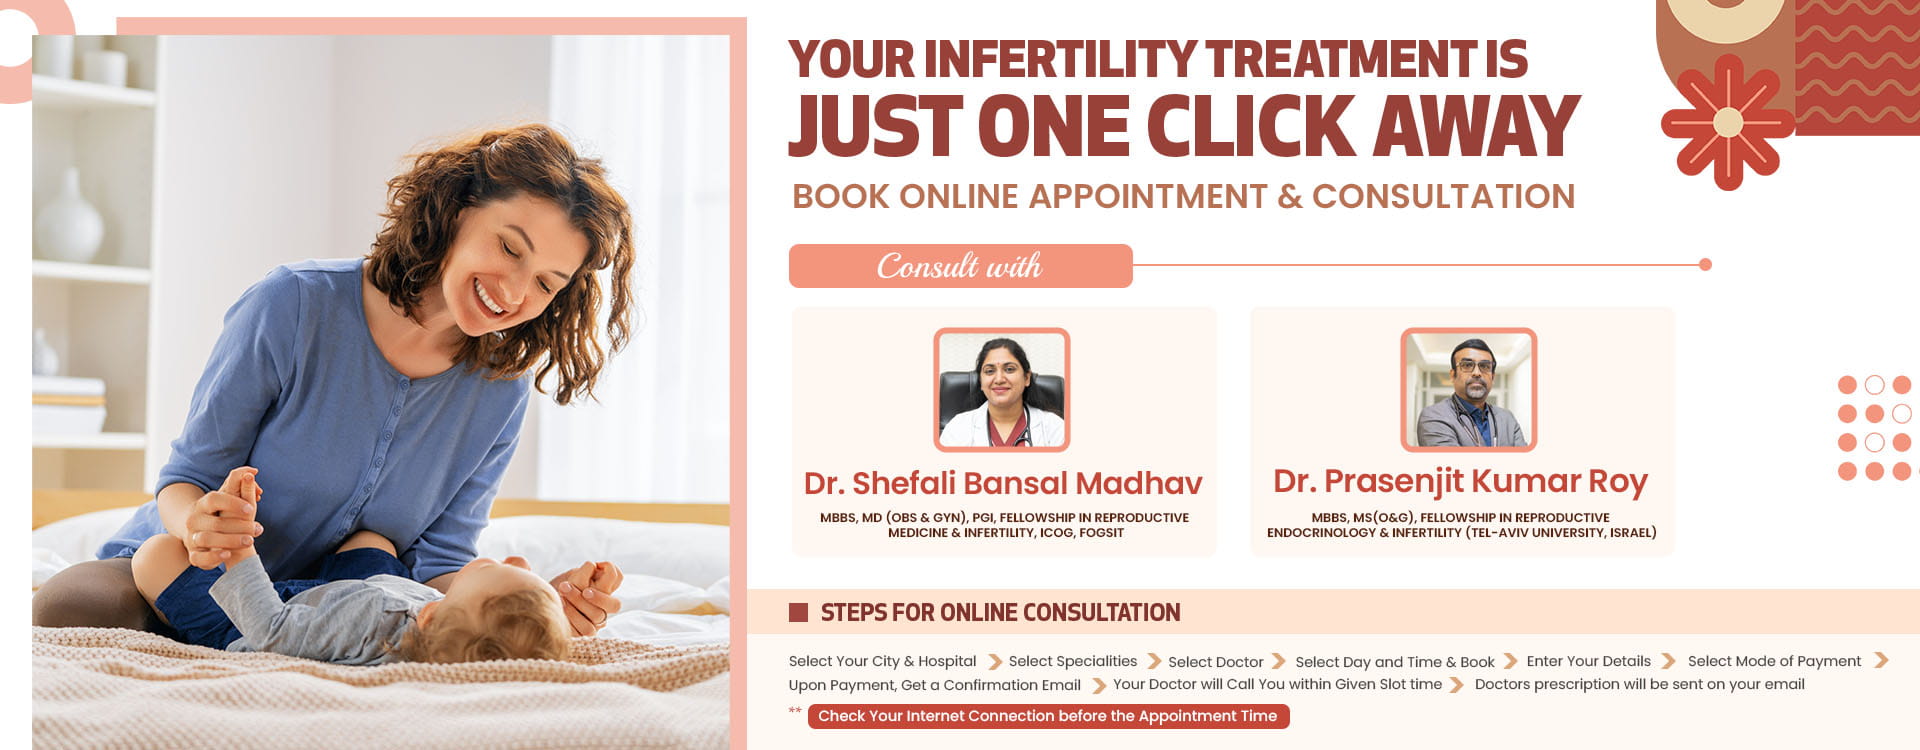 Book online appointment with New Life ivf Fertility Centre